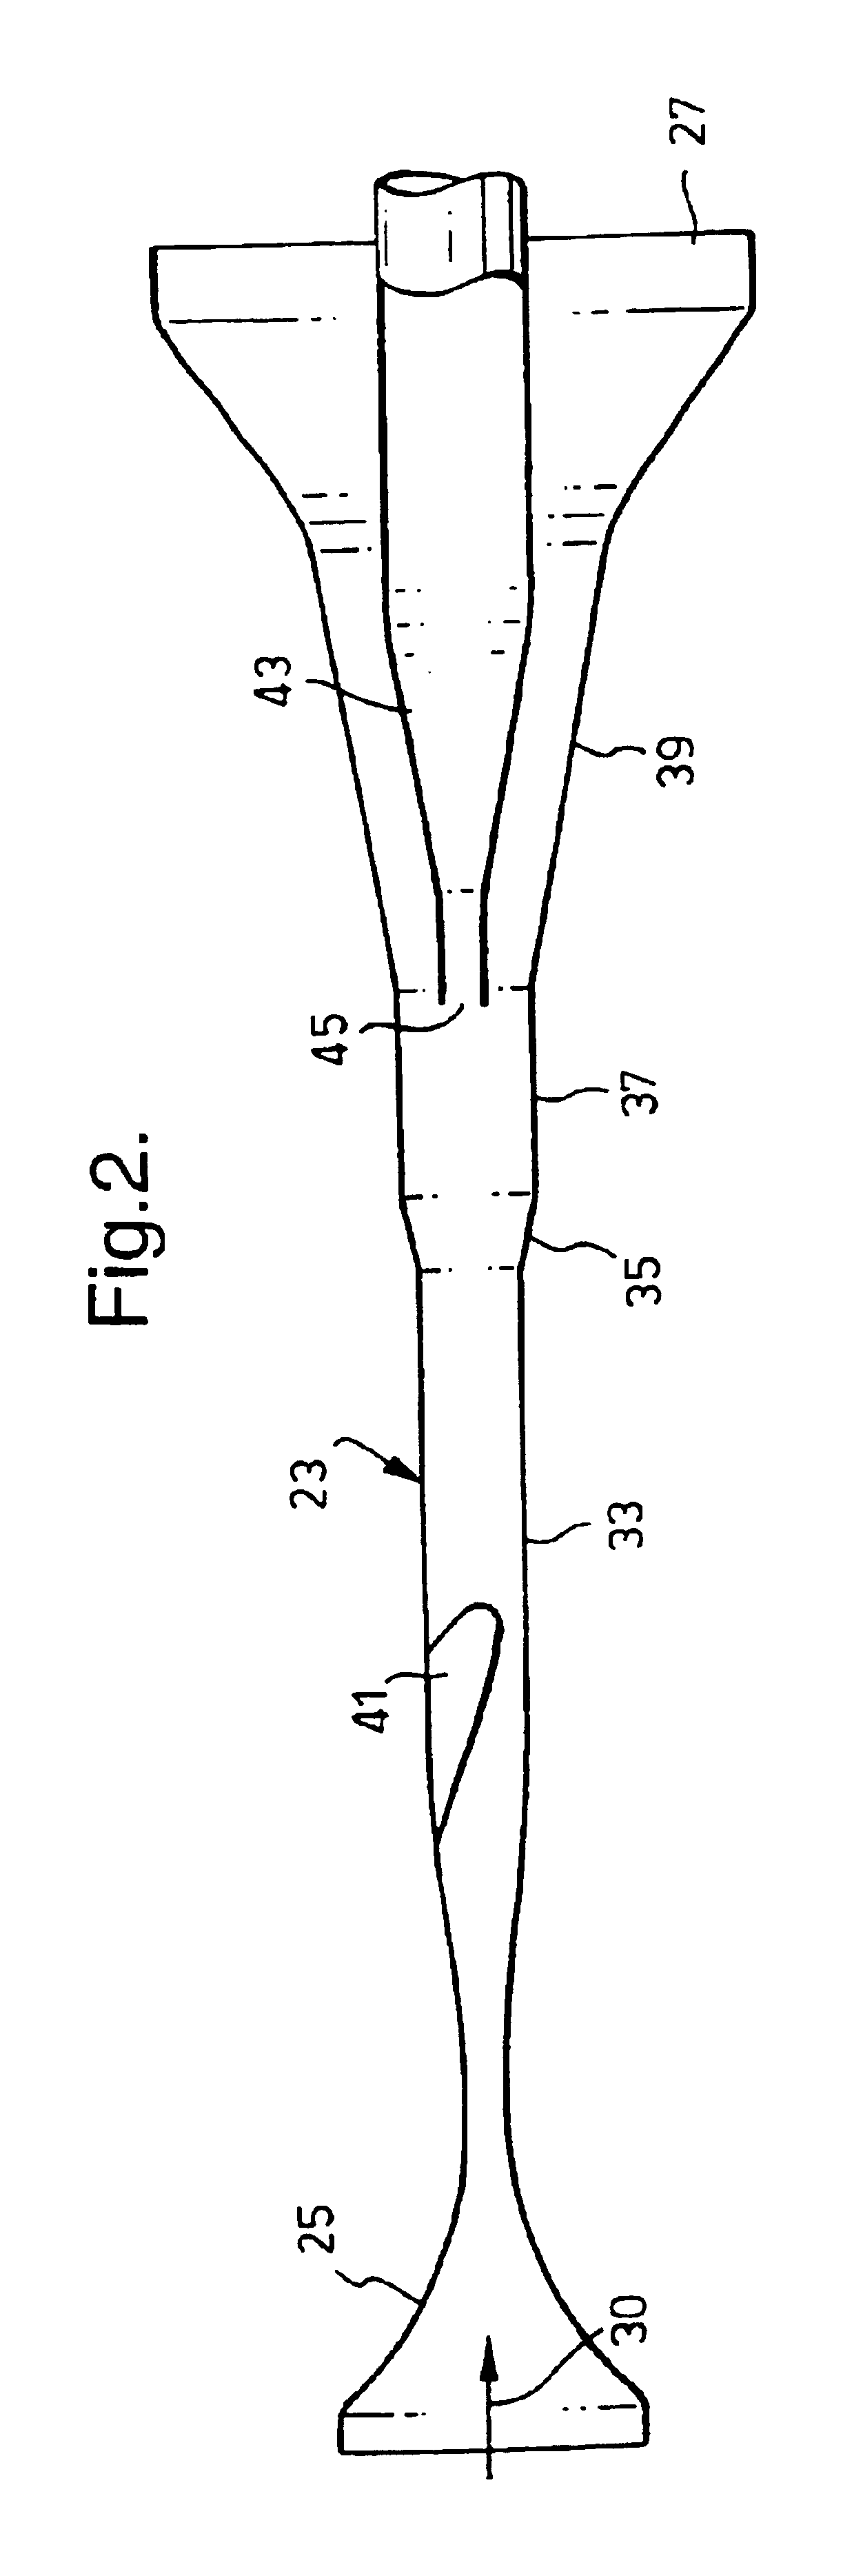 Method for removing condensables from a natural gas stream, at a wellhead, downstream of the wellhead choke